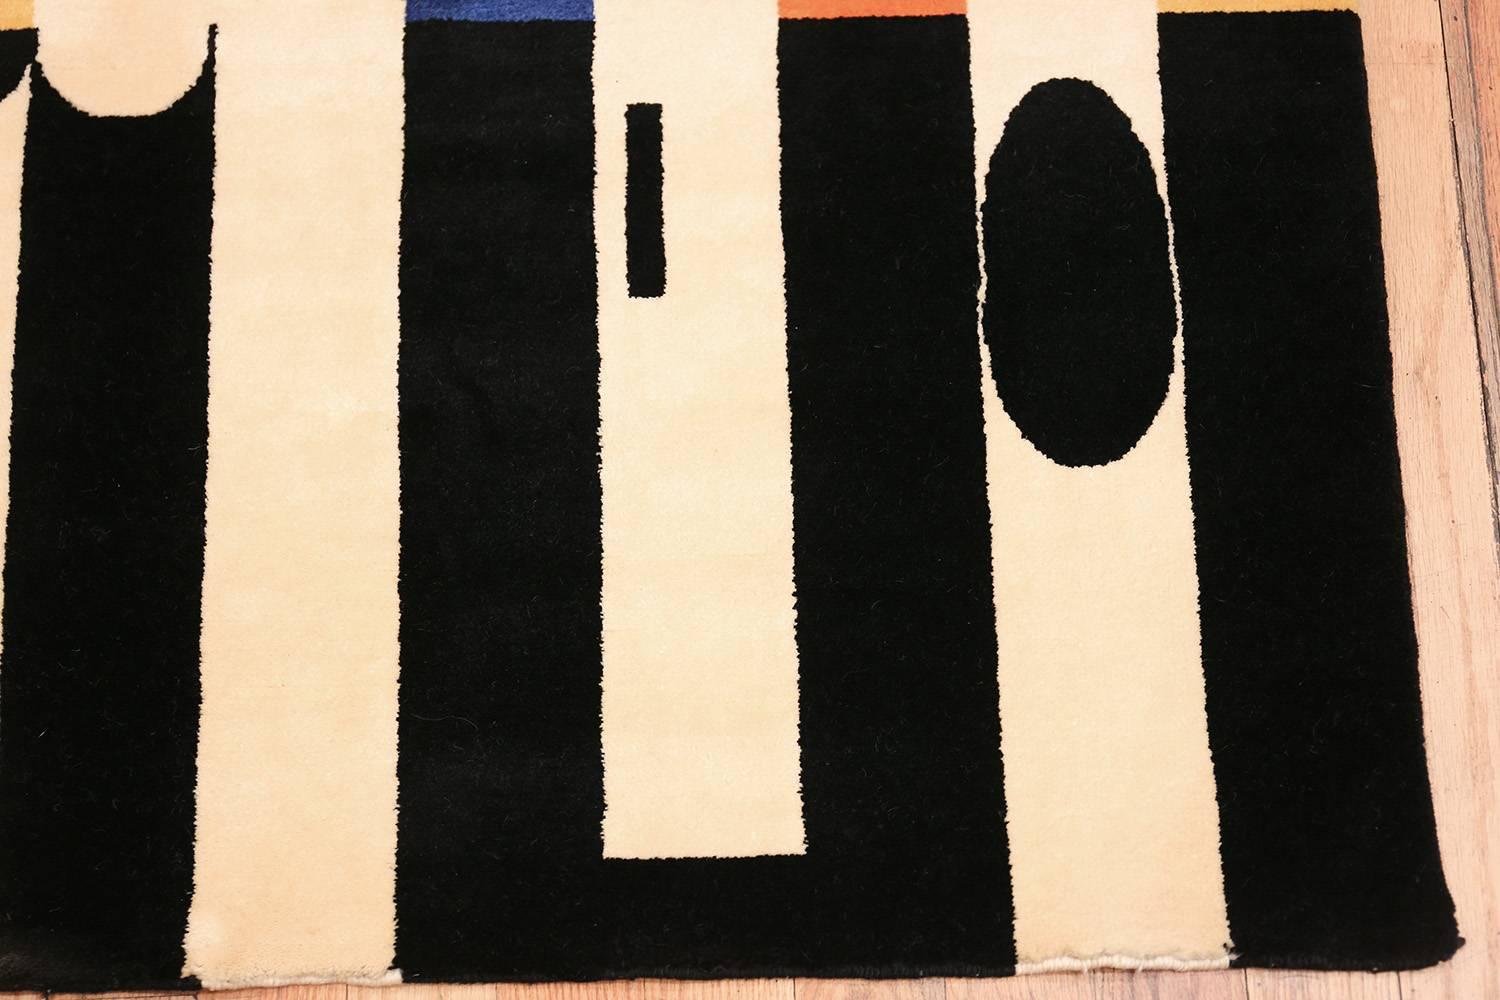 Hand-Woven Vintage Geometric Israeli Rug by Yaacov Agam. Size: 5 ft 7 in x 7 ft 1 in